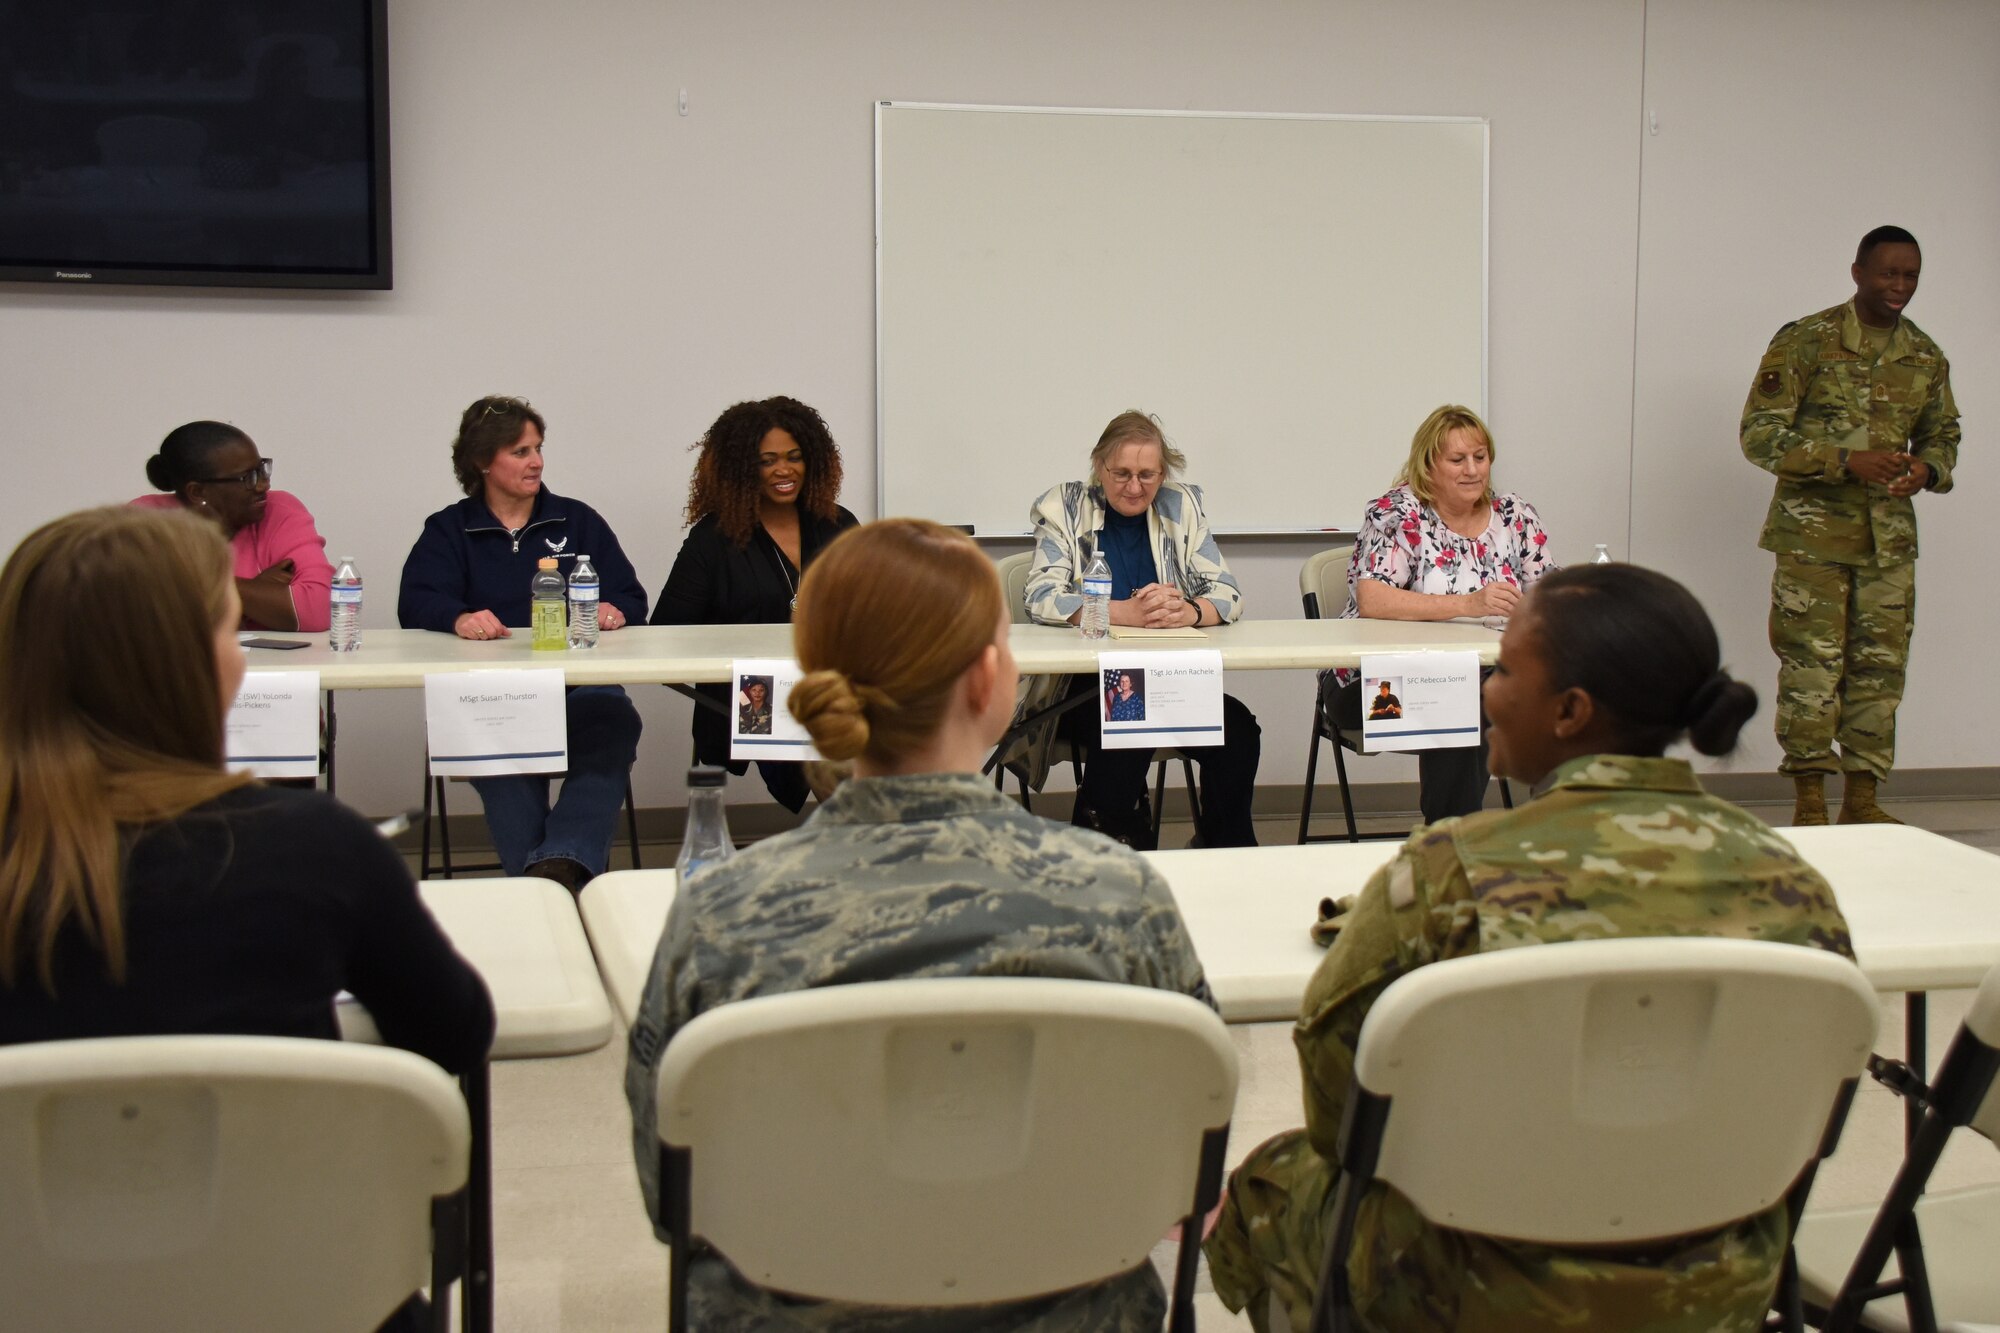 U.S. Air Force Chief Master Sgt. Lavor Kirkpatrick, 17th Training Wing command chief, opens the Service Through the Decades panel in honor of Women’s History Month at the Taylor Chapel on Goodfellow Air Force Base, Texas, March 8, 2019. The panel consisted of five women who served in various branches of service from the 1970s until early 2000s. (U.S. Air Force photo by Senior Airman Seraiah Hines/Released)